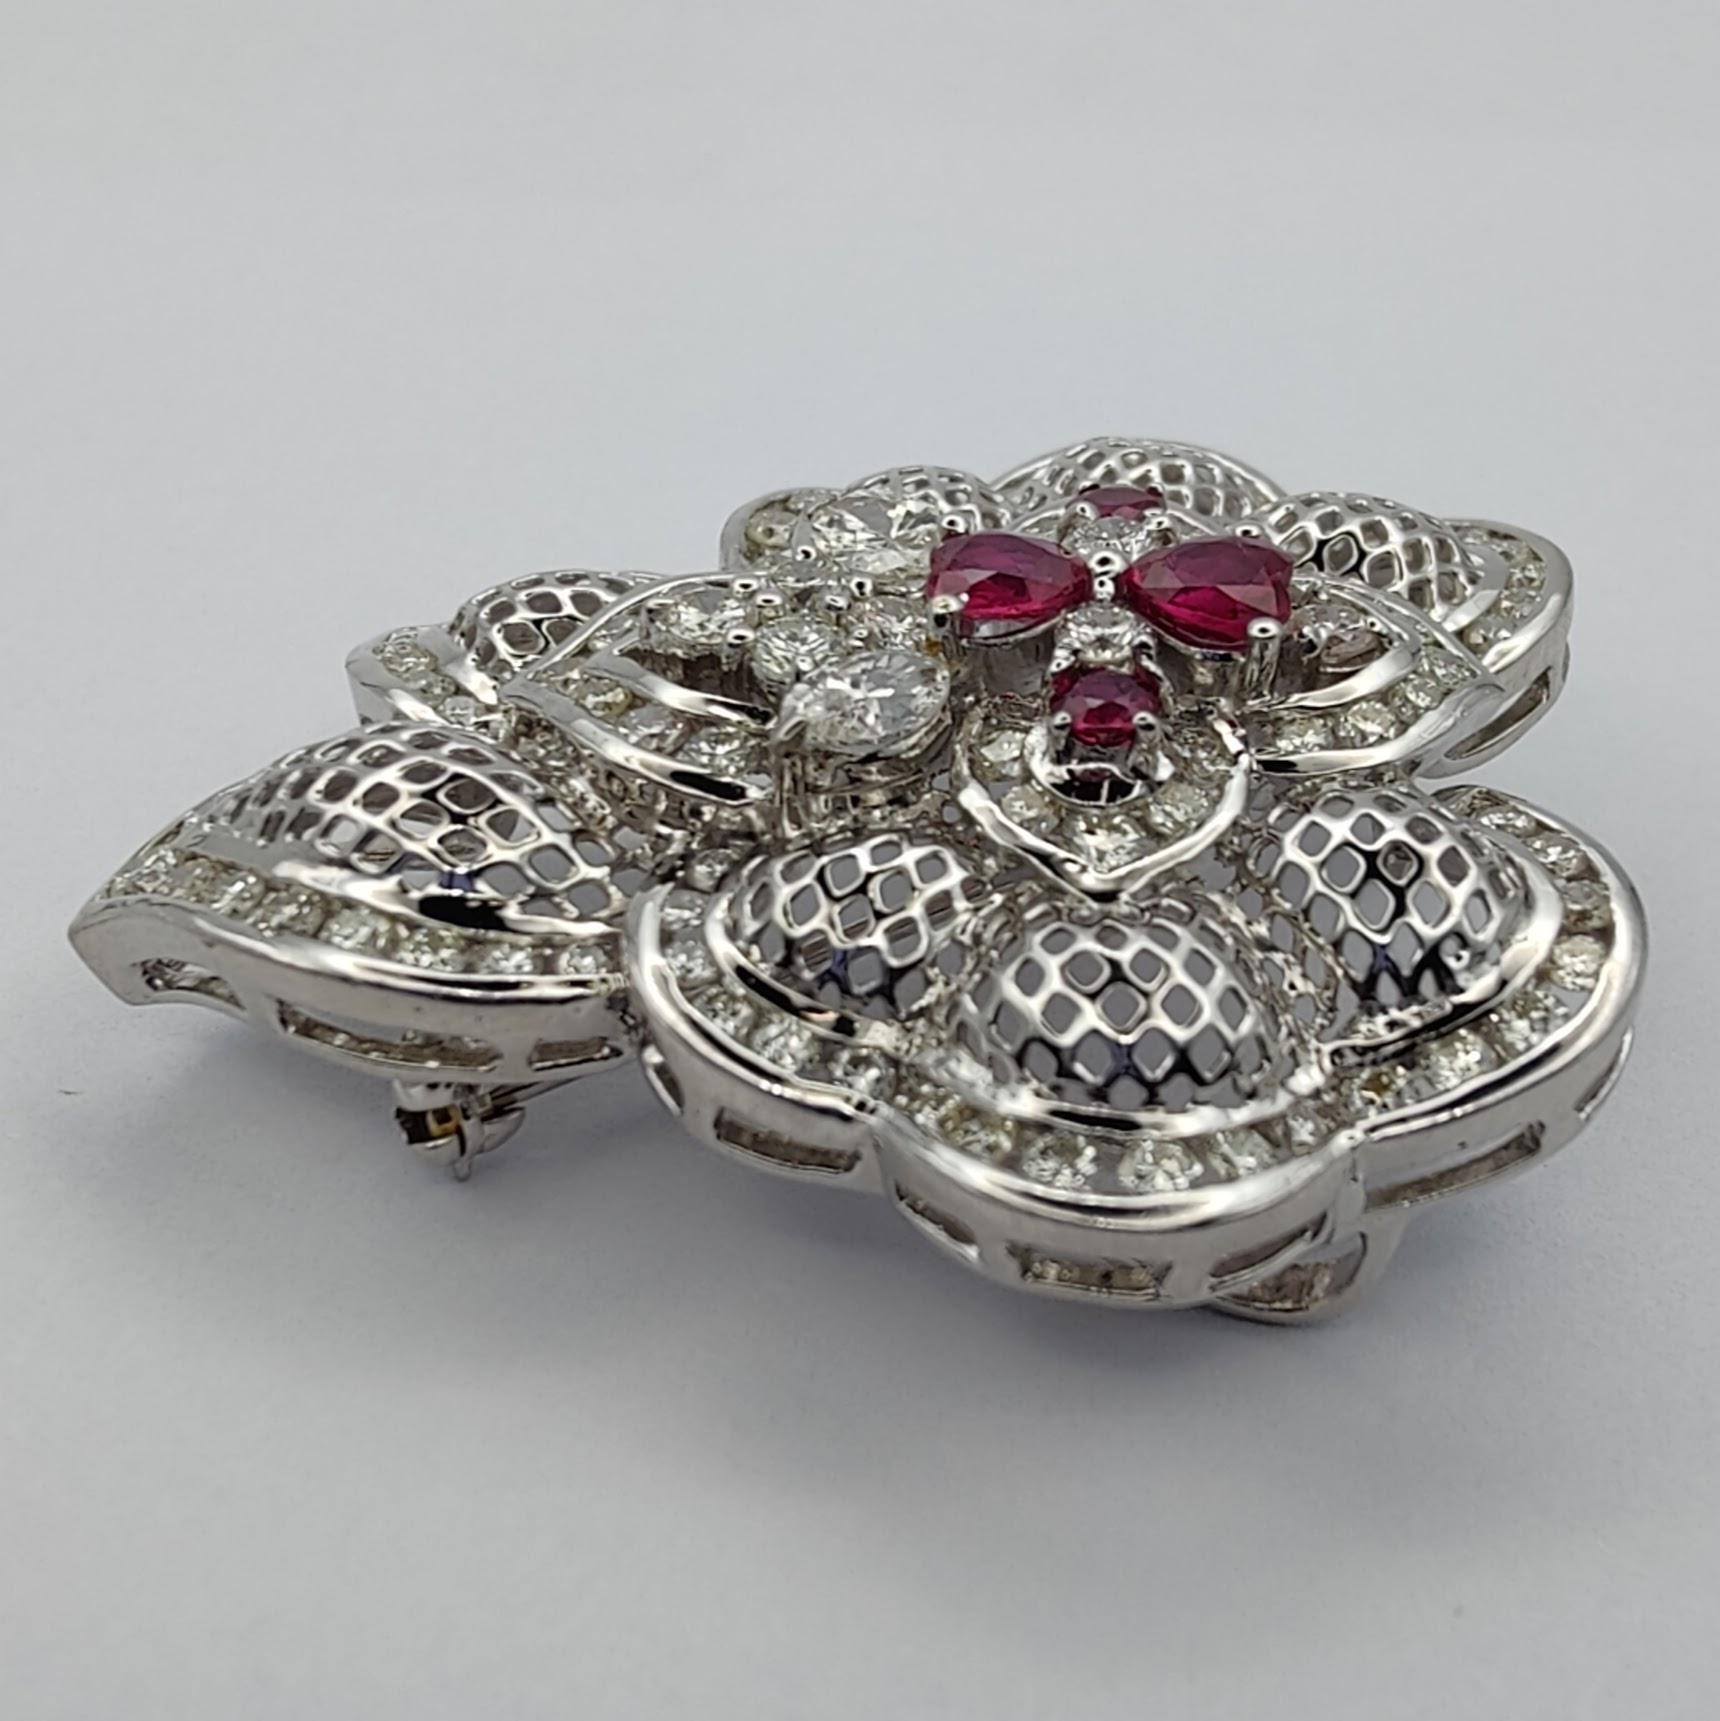 Round Cut Baroque 0.78 Carat Ruby and 2.7 Carat Diamond Pendant Brooch in 18k White Gold For Sale